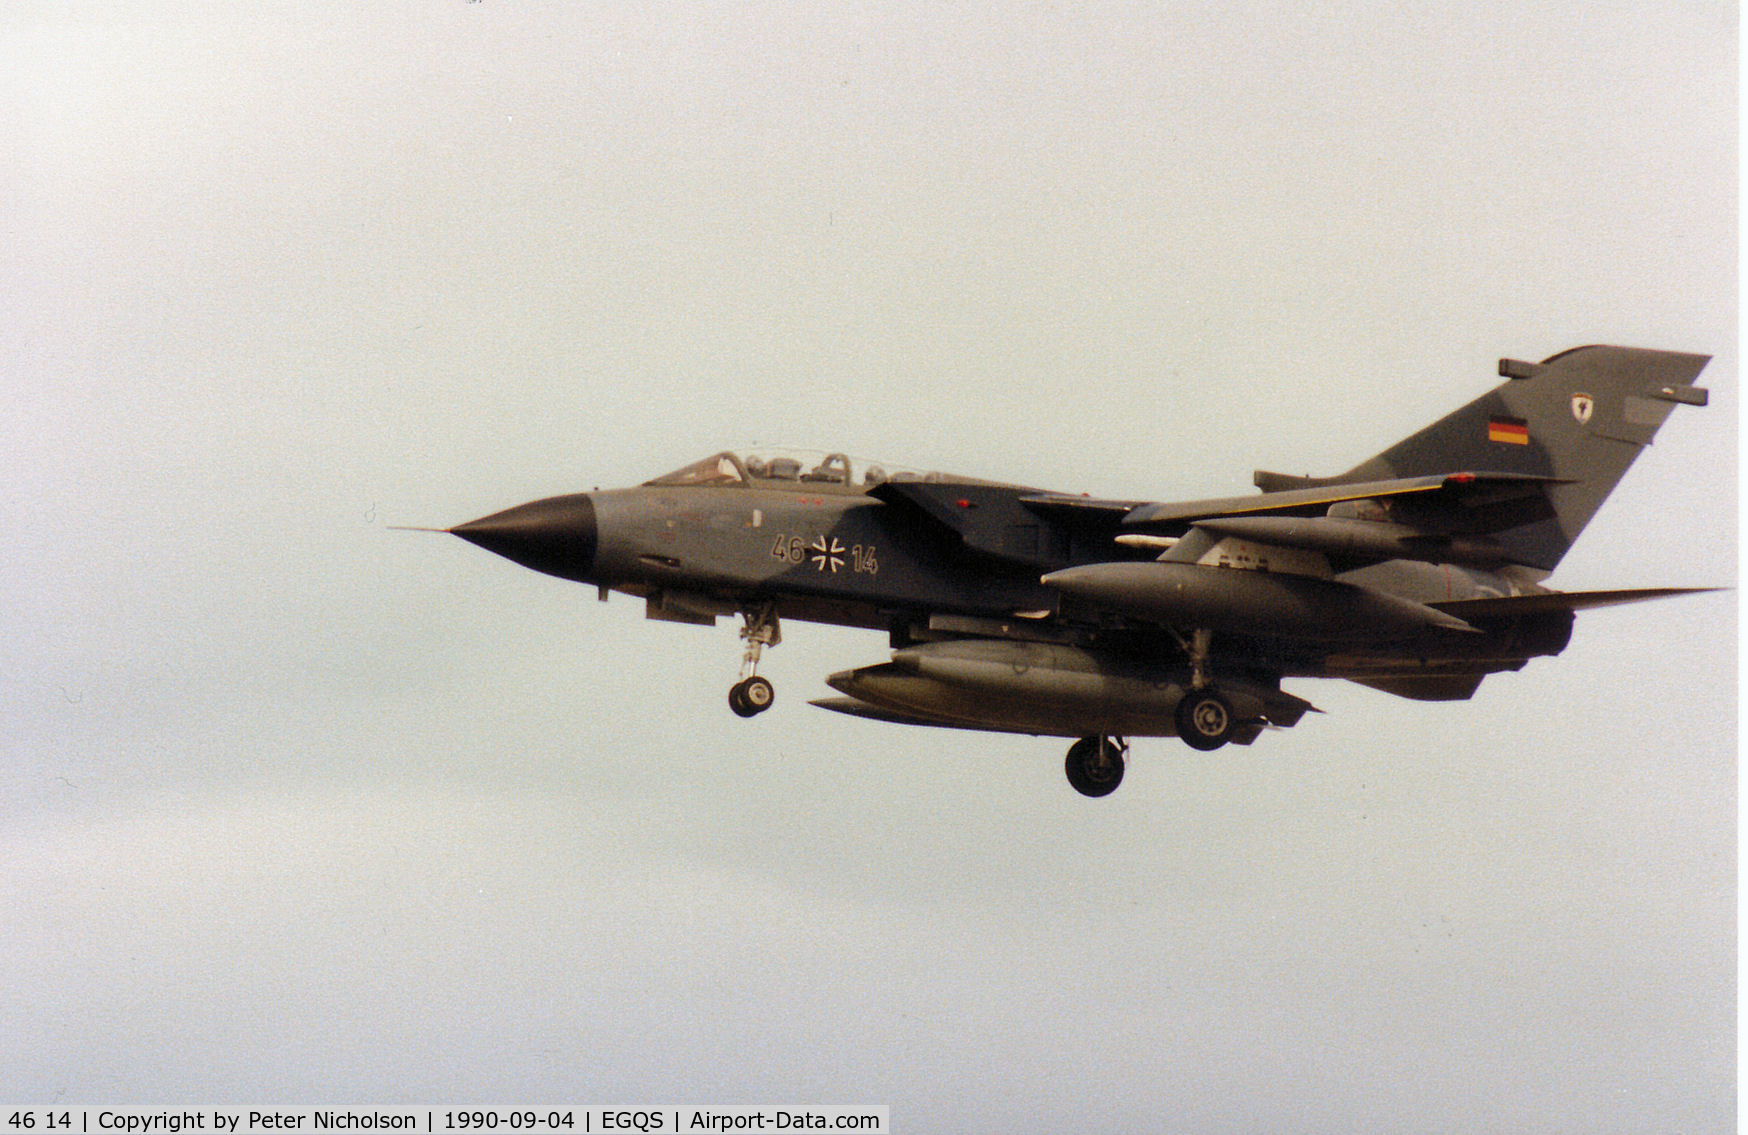 46 14, Panavia Tornado IDS C/N 776/GS247/4314, Tornado IDS of German Marineflieger MFG-1 on final approach to Runway 23 at RAF Lossiemouth in the Summer of 1990.